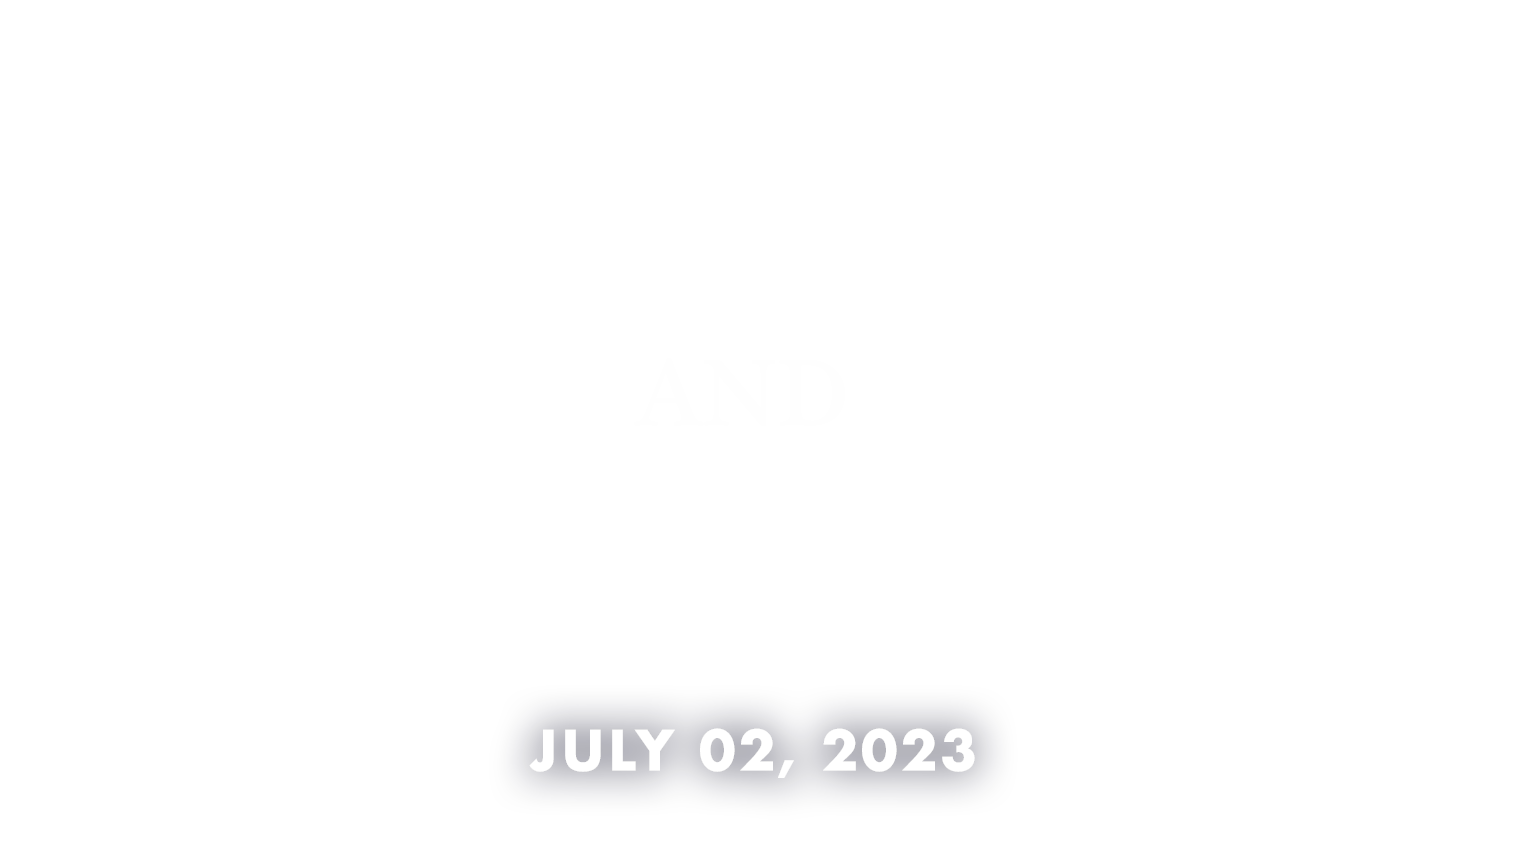 God & Country Day, July 02